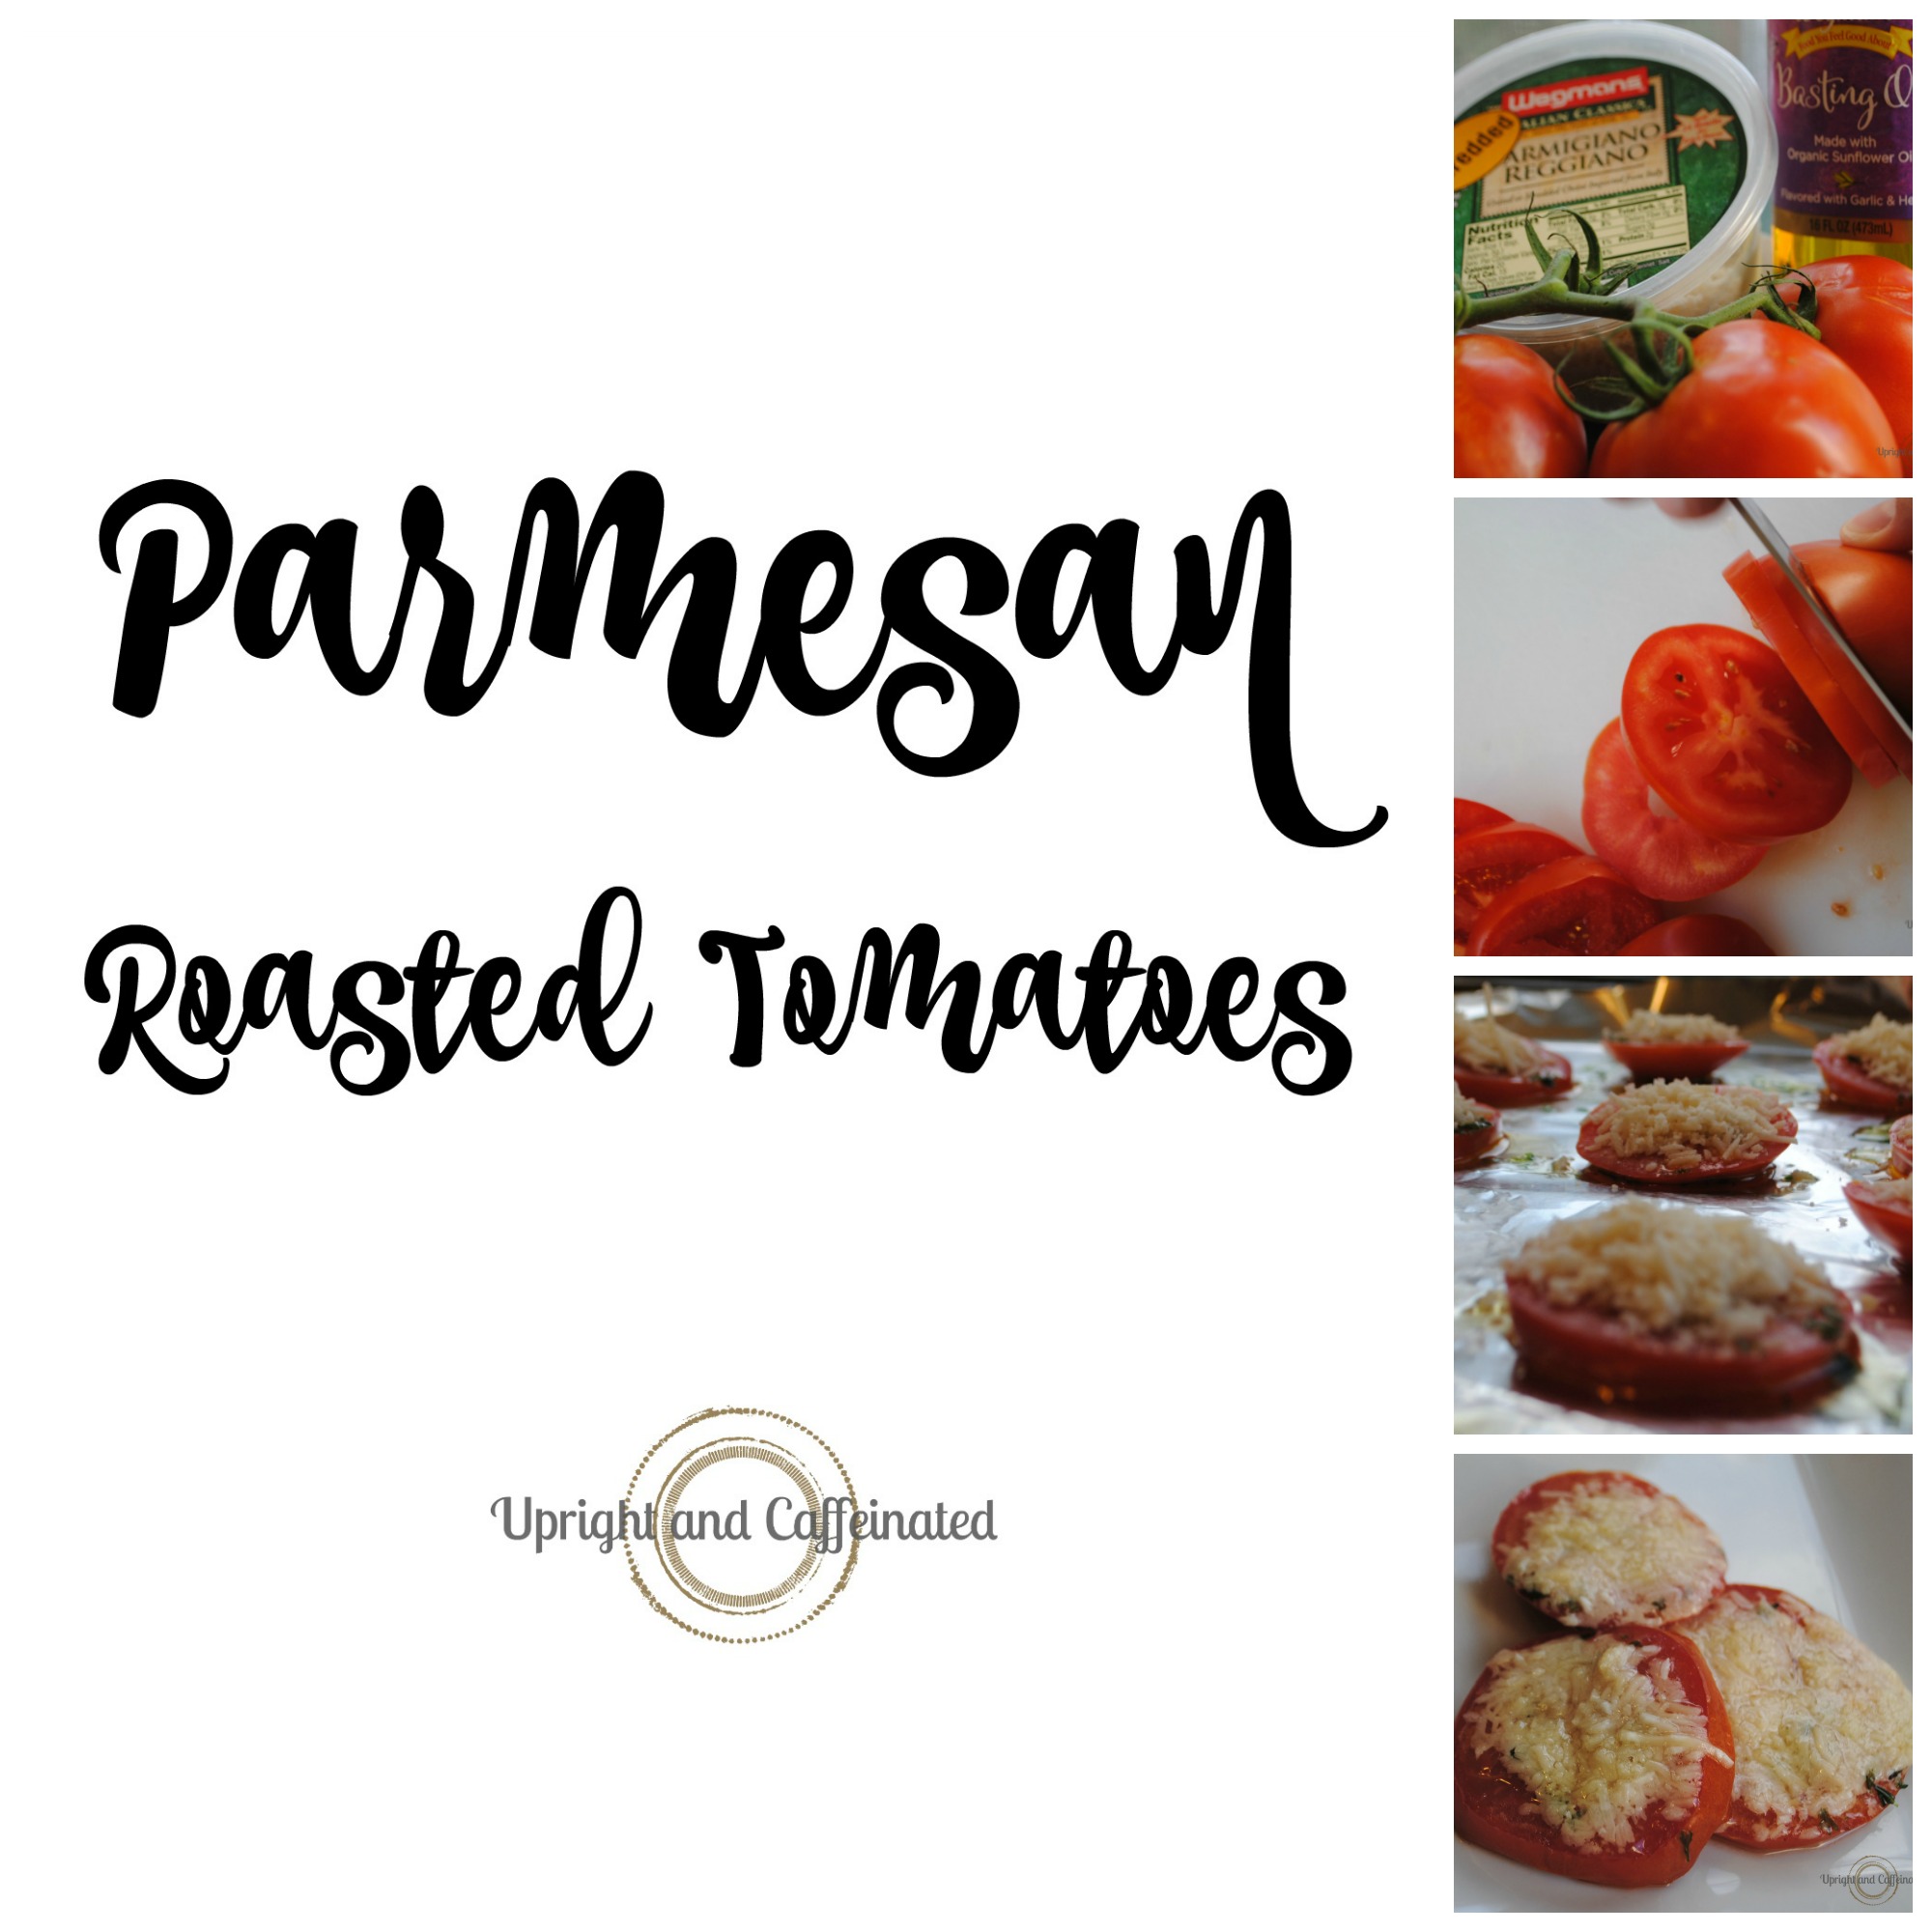 This Parmesan roasted tomatoes recipe is fantastic! This is an easy and quick side dish for any meal. Best part- it includes only three ingredients.